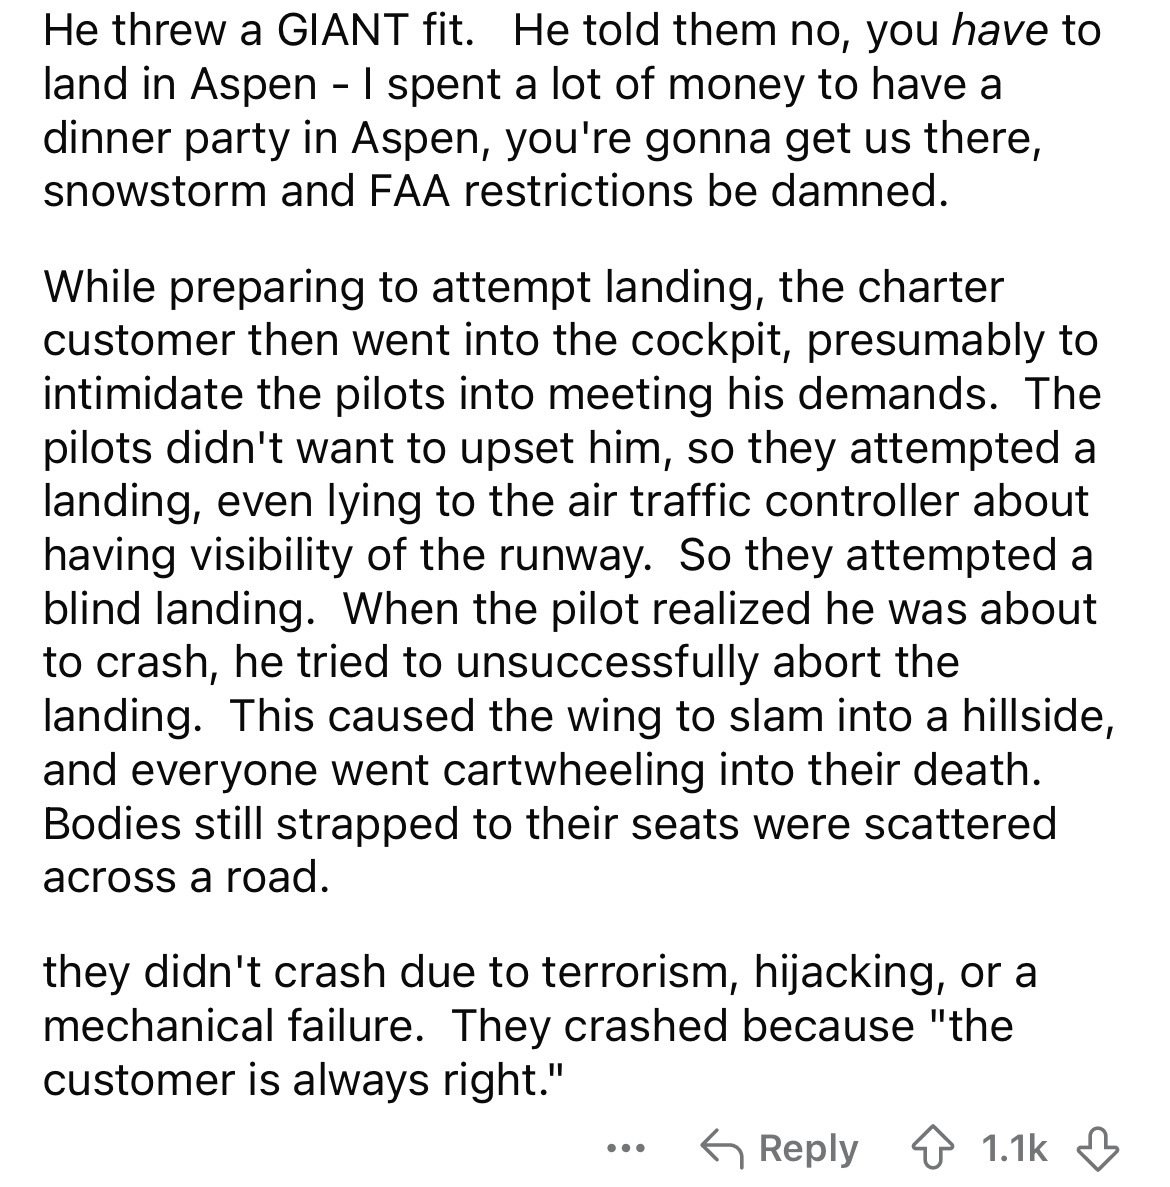 document - He threw a Giant fit. He told them no, you have to land in Aspen I spent a lot of money to have a dinner party in Aspen, you're gonna get us there, snowstorm and Faa restrictions be damned. While preparing to attempt landing, the charter custom